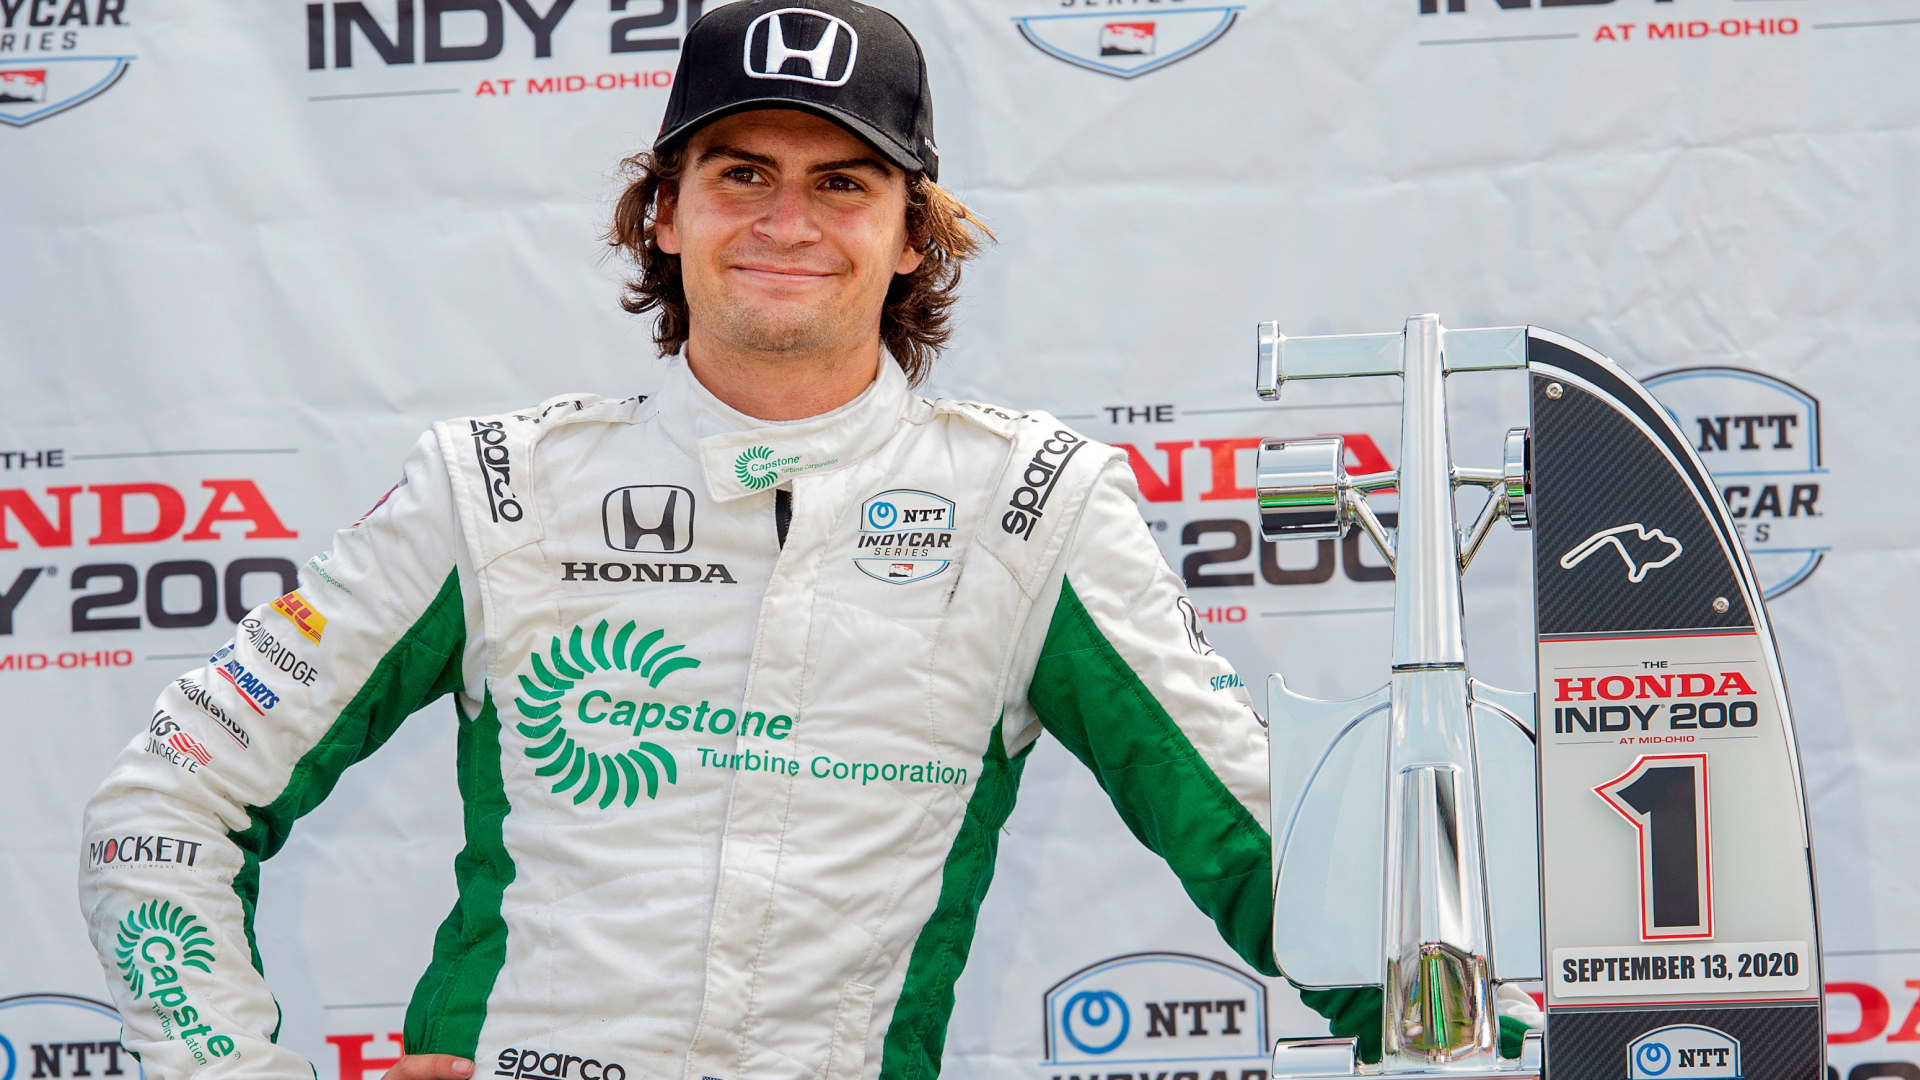 Colton Herta waits on the award stand after winning the IndyCar Series auto race, at Mid-Ohio Sports Car Course, Sunday, Sept. 13, 2020, in Lexington, Ohio.